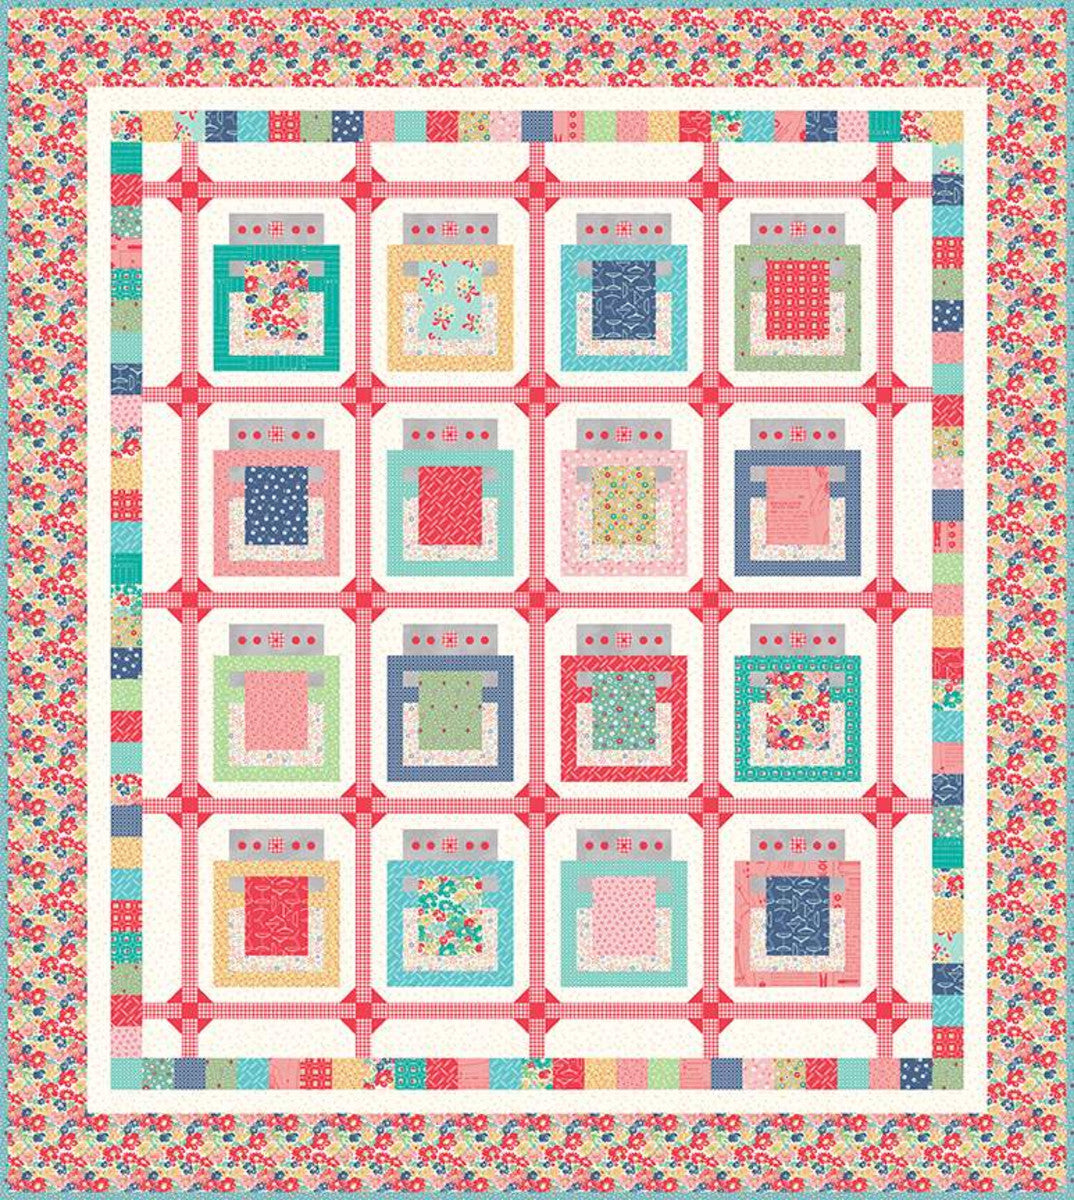 PATTERN, BAKED WITH LOVE Quilt Pattern by Lori Holt of Bee in my Bonnet